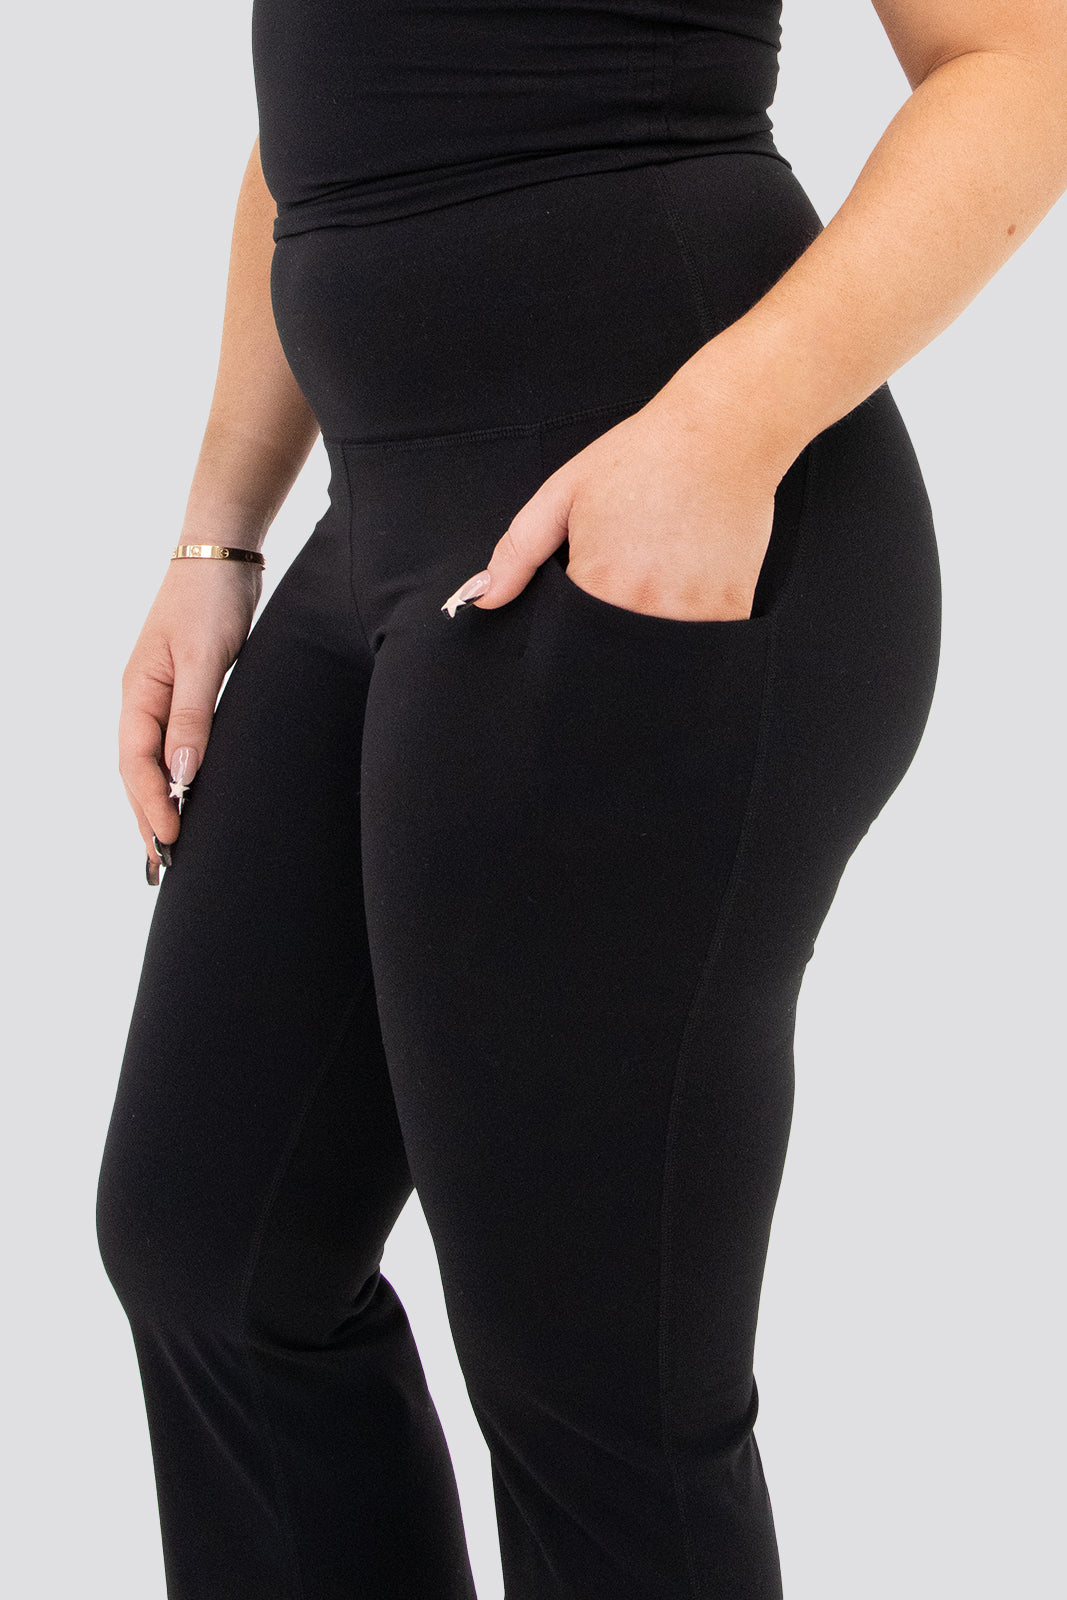 The Dayna wide leg yoga pants feature extra high waist and ankle